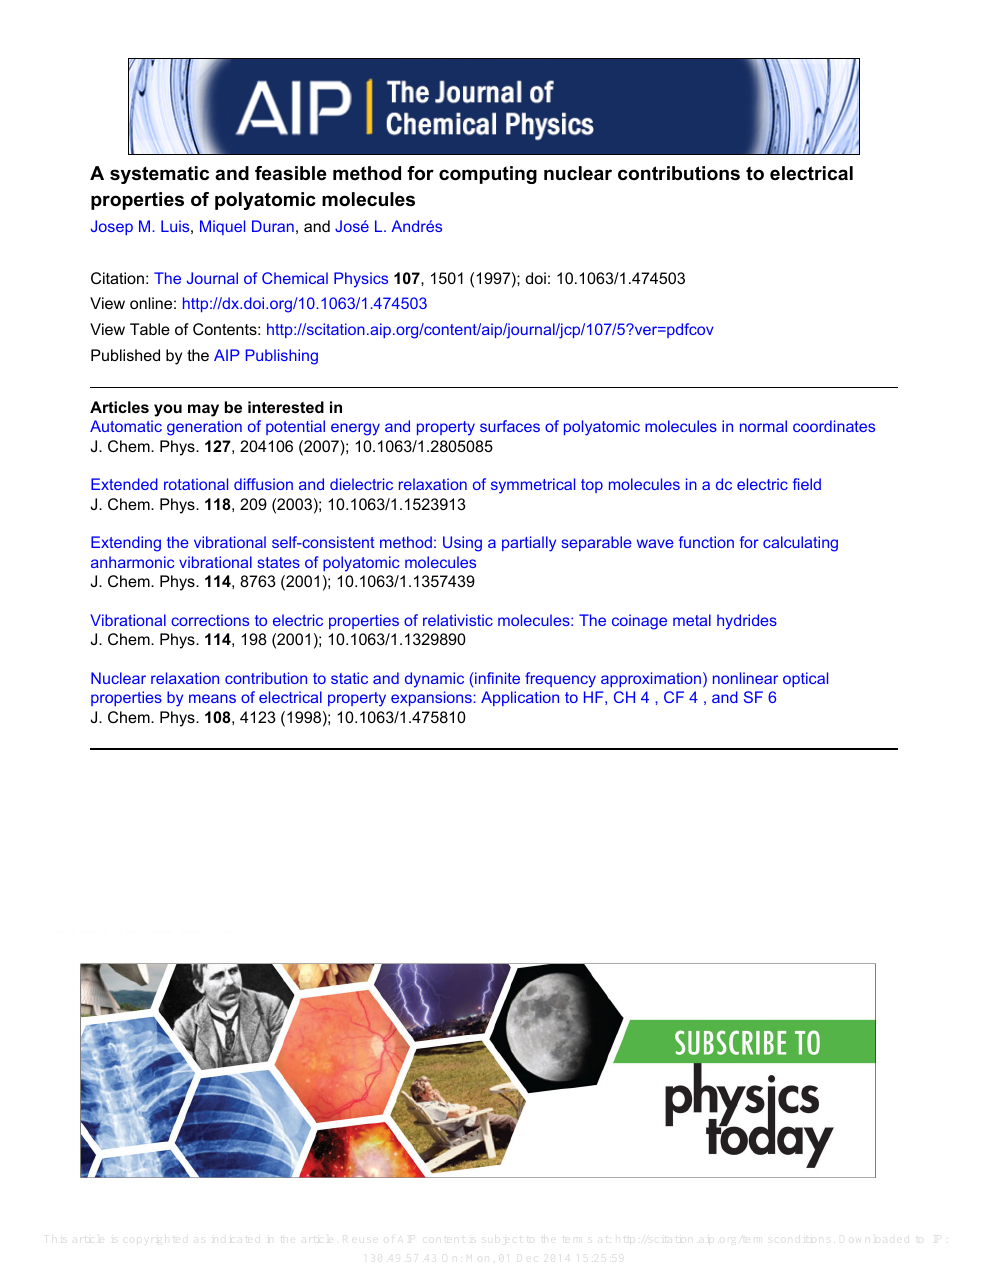 A Systematic And Feasible Method For Computing Nuclear Contributions To Electrical Properties Of Polyatomic Molecules Topic Of Research Paper In Physical Sciences Download Scholarly Article Pdf And Read For Free On